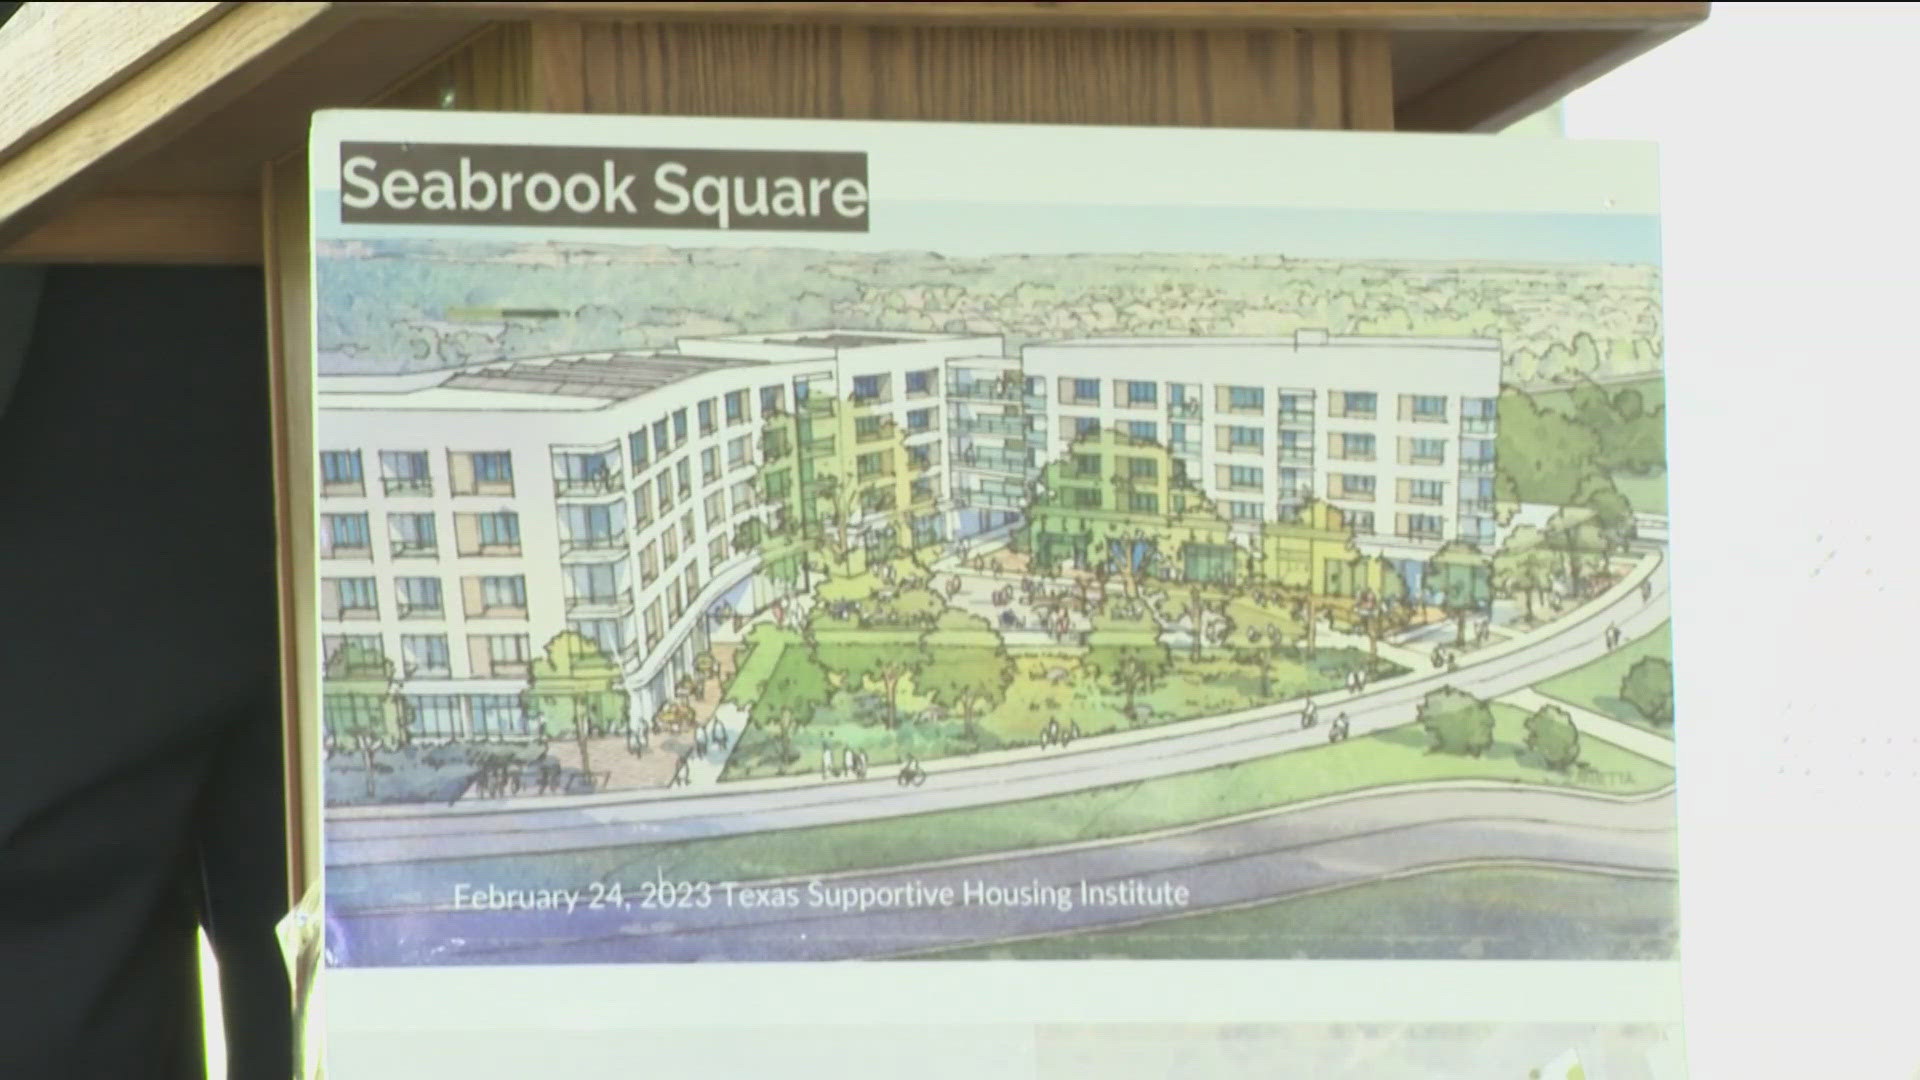 Phase II of Seabrook Square will provide 60 fully furnished units for unhoused people. Phase I will provide 204 affordable units for low-income Austinites.